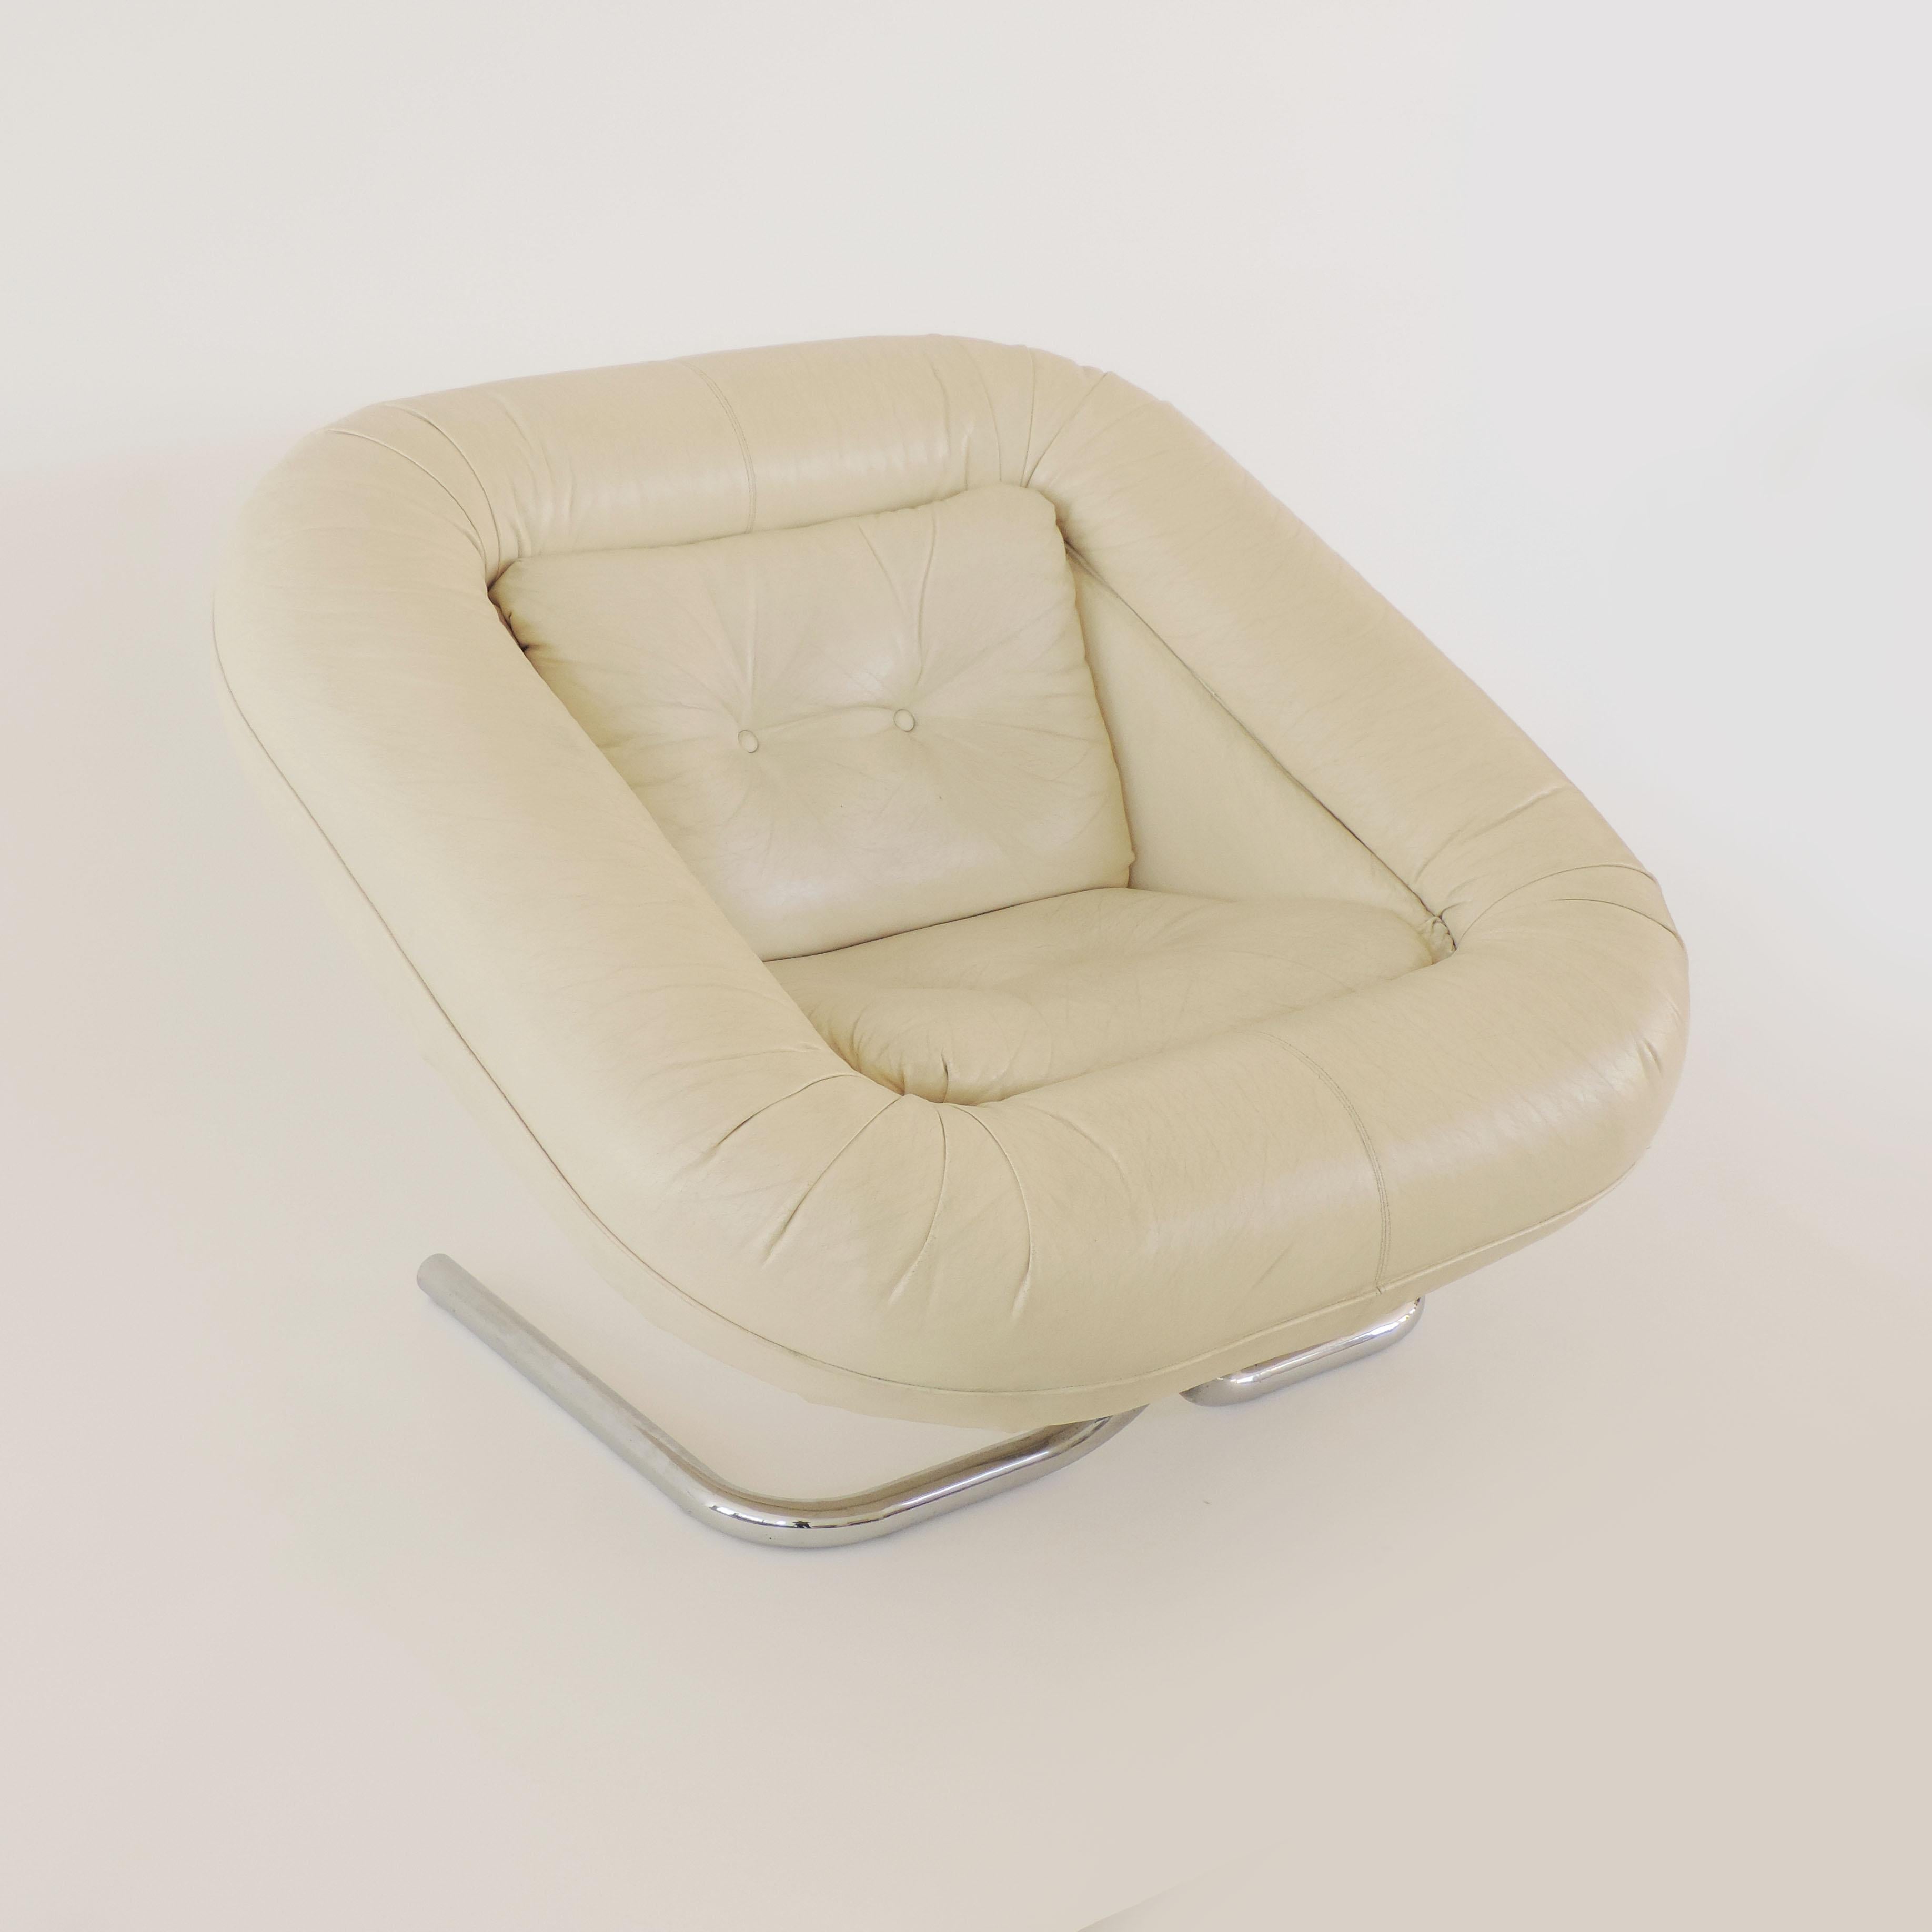 Metal Adriano Piazzesi Pair of Spring Lounge Chairs for TreD, Italy 1973